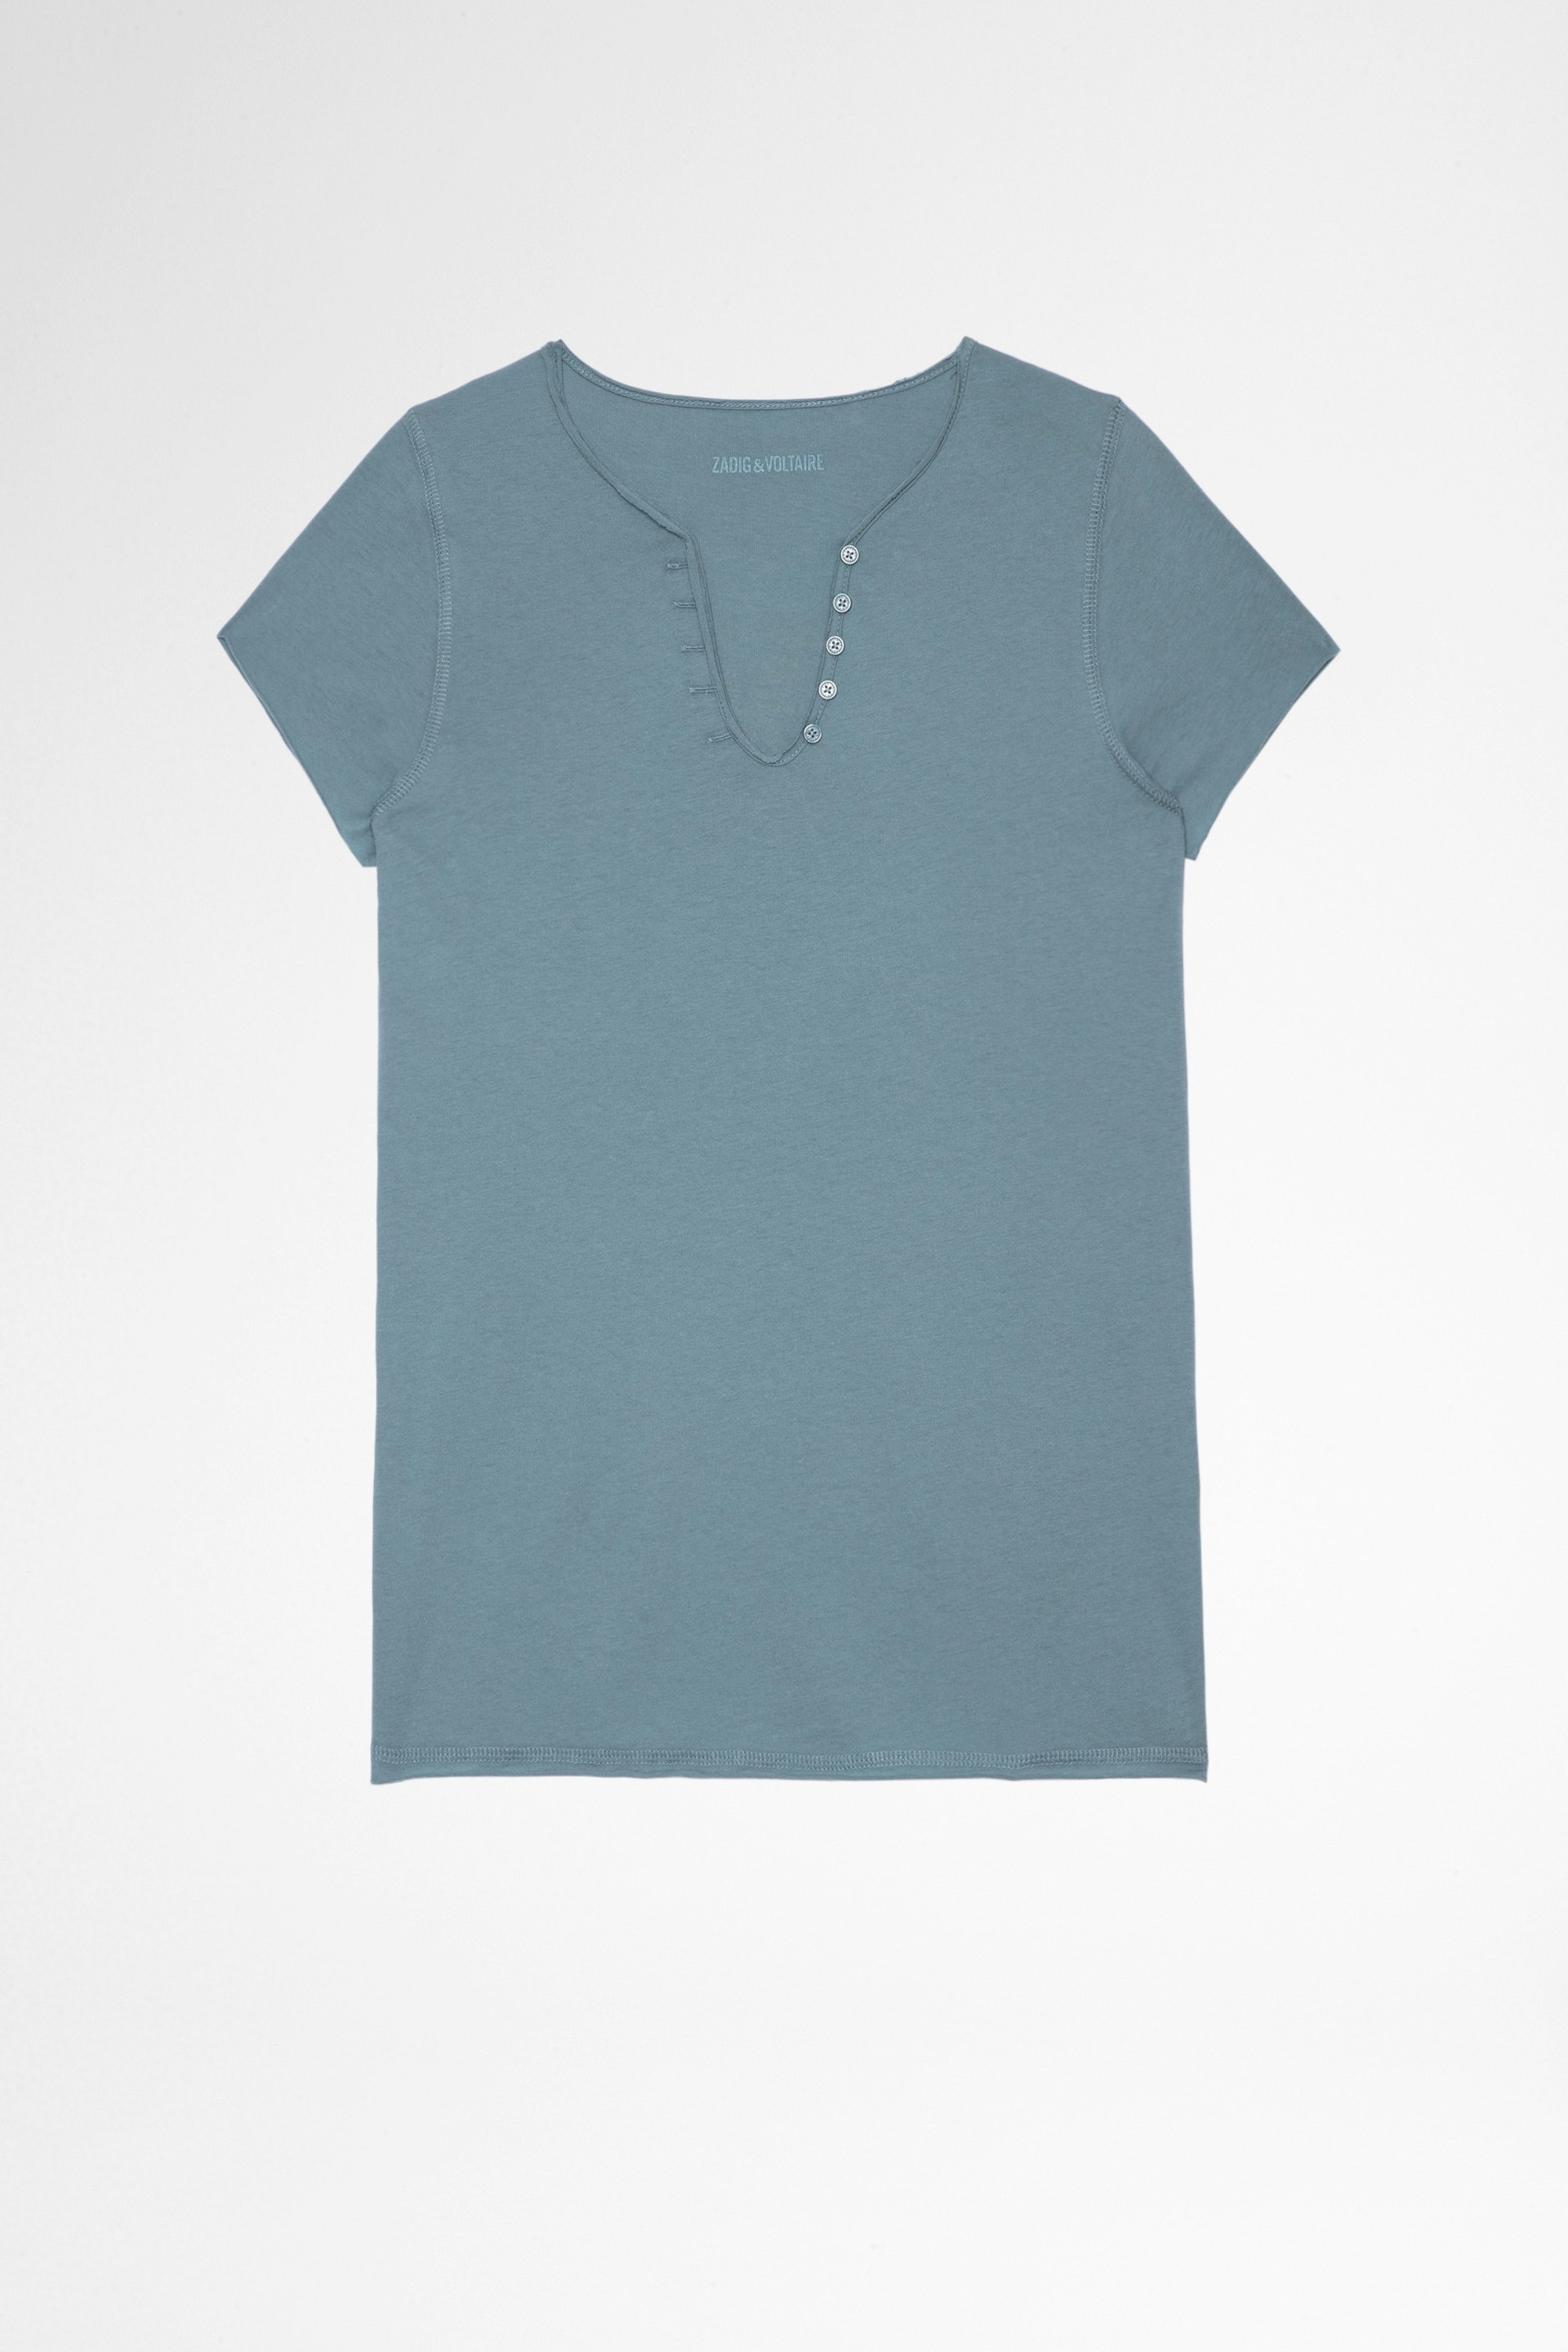 ZV New Blason Henley Ｔシャツ Women's blue-grey cotton Henley t-shirt with ZV applique on the back